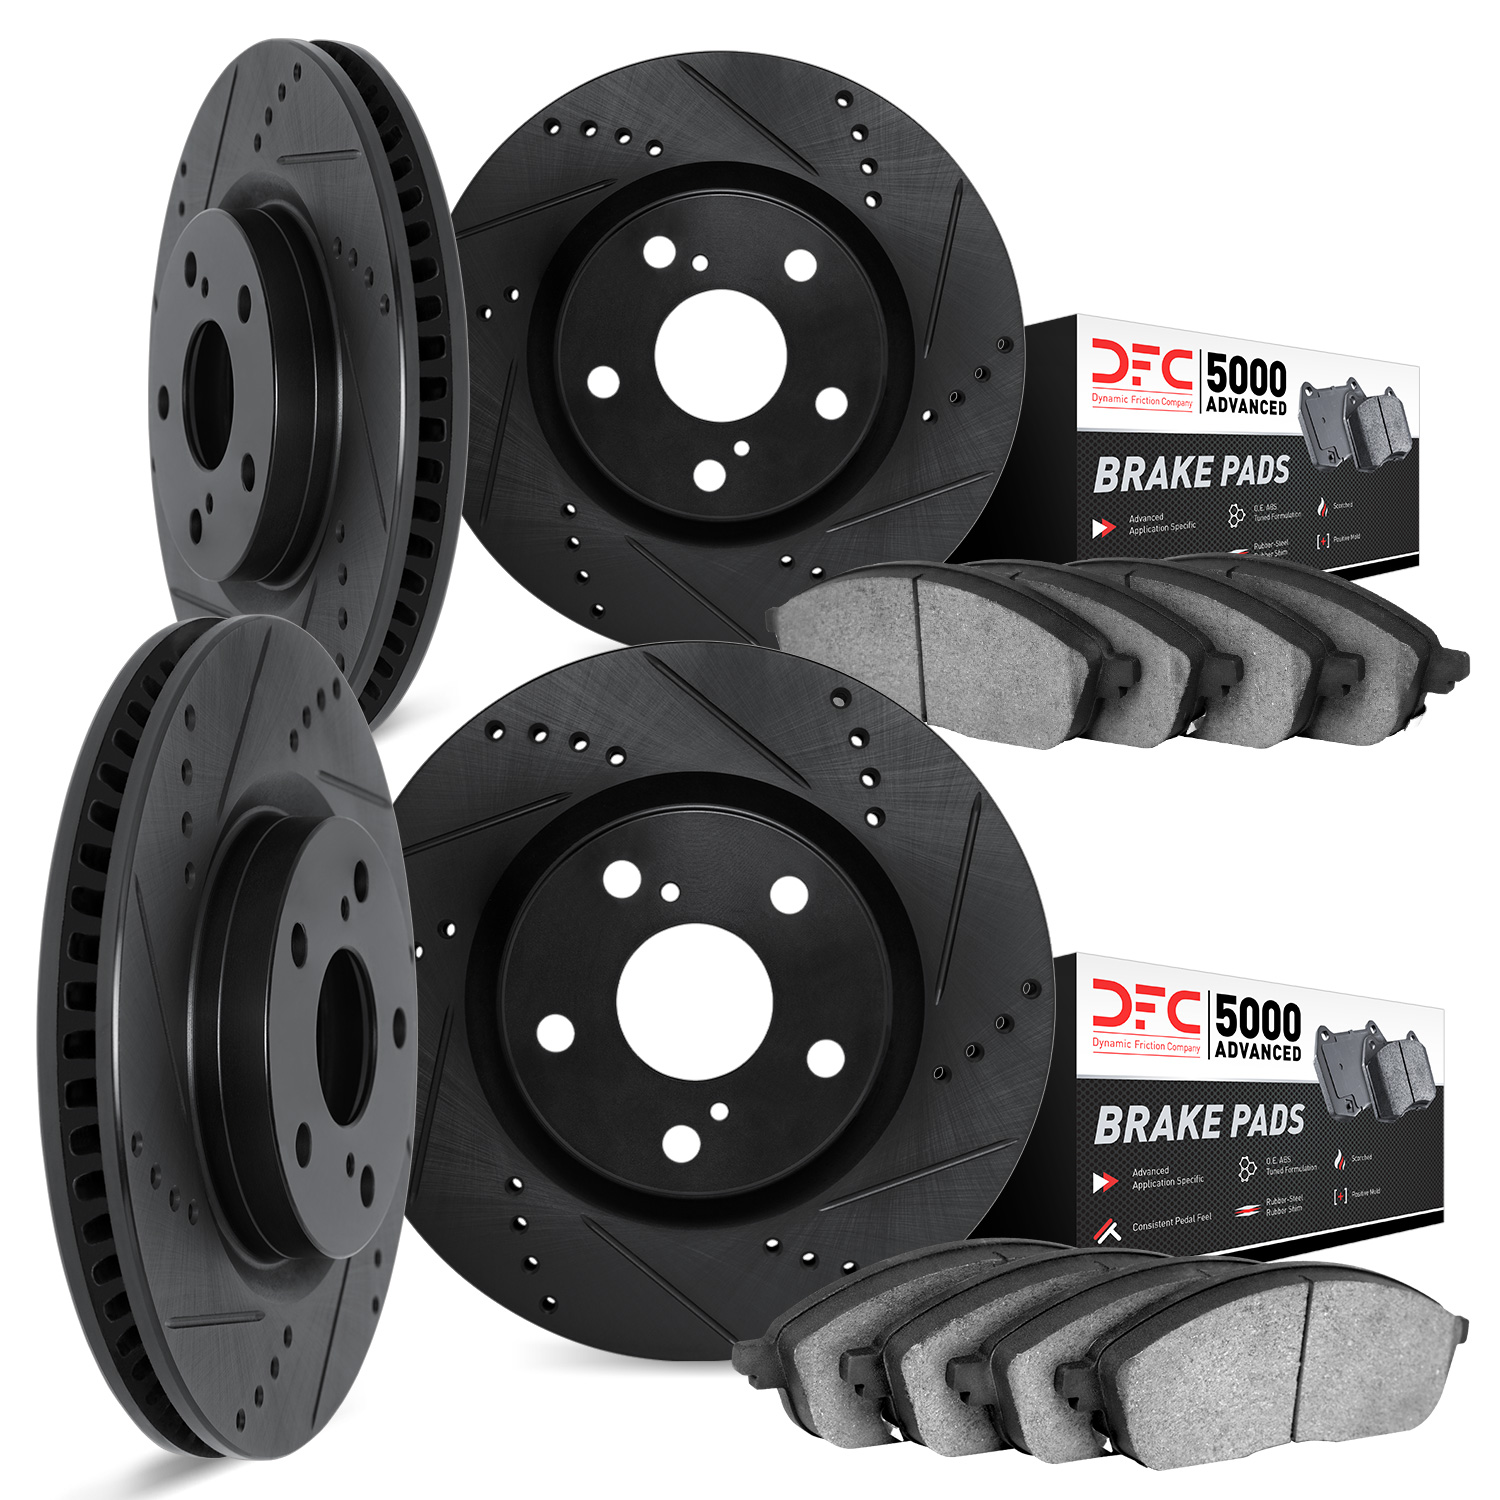 8504-68005 Drilled/Slotted Brake Rotors w/5000 Advanced Brake Pads Kit [Black], 2003-2008 Infiniti/Nissan, Position: Front and R